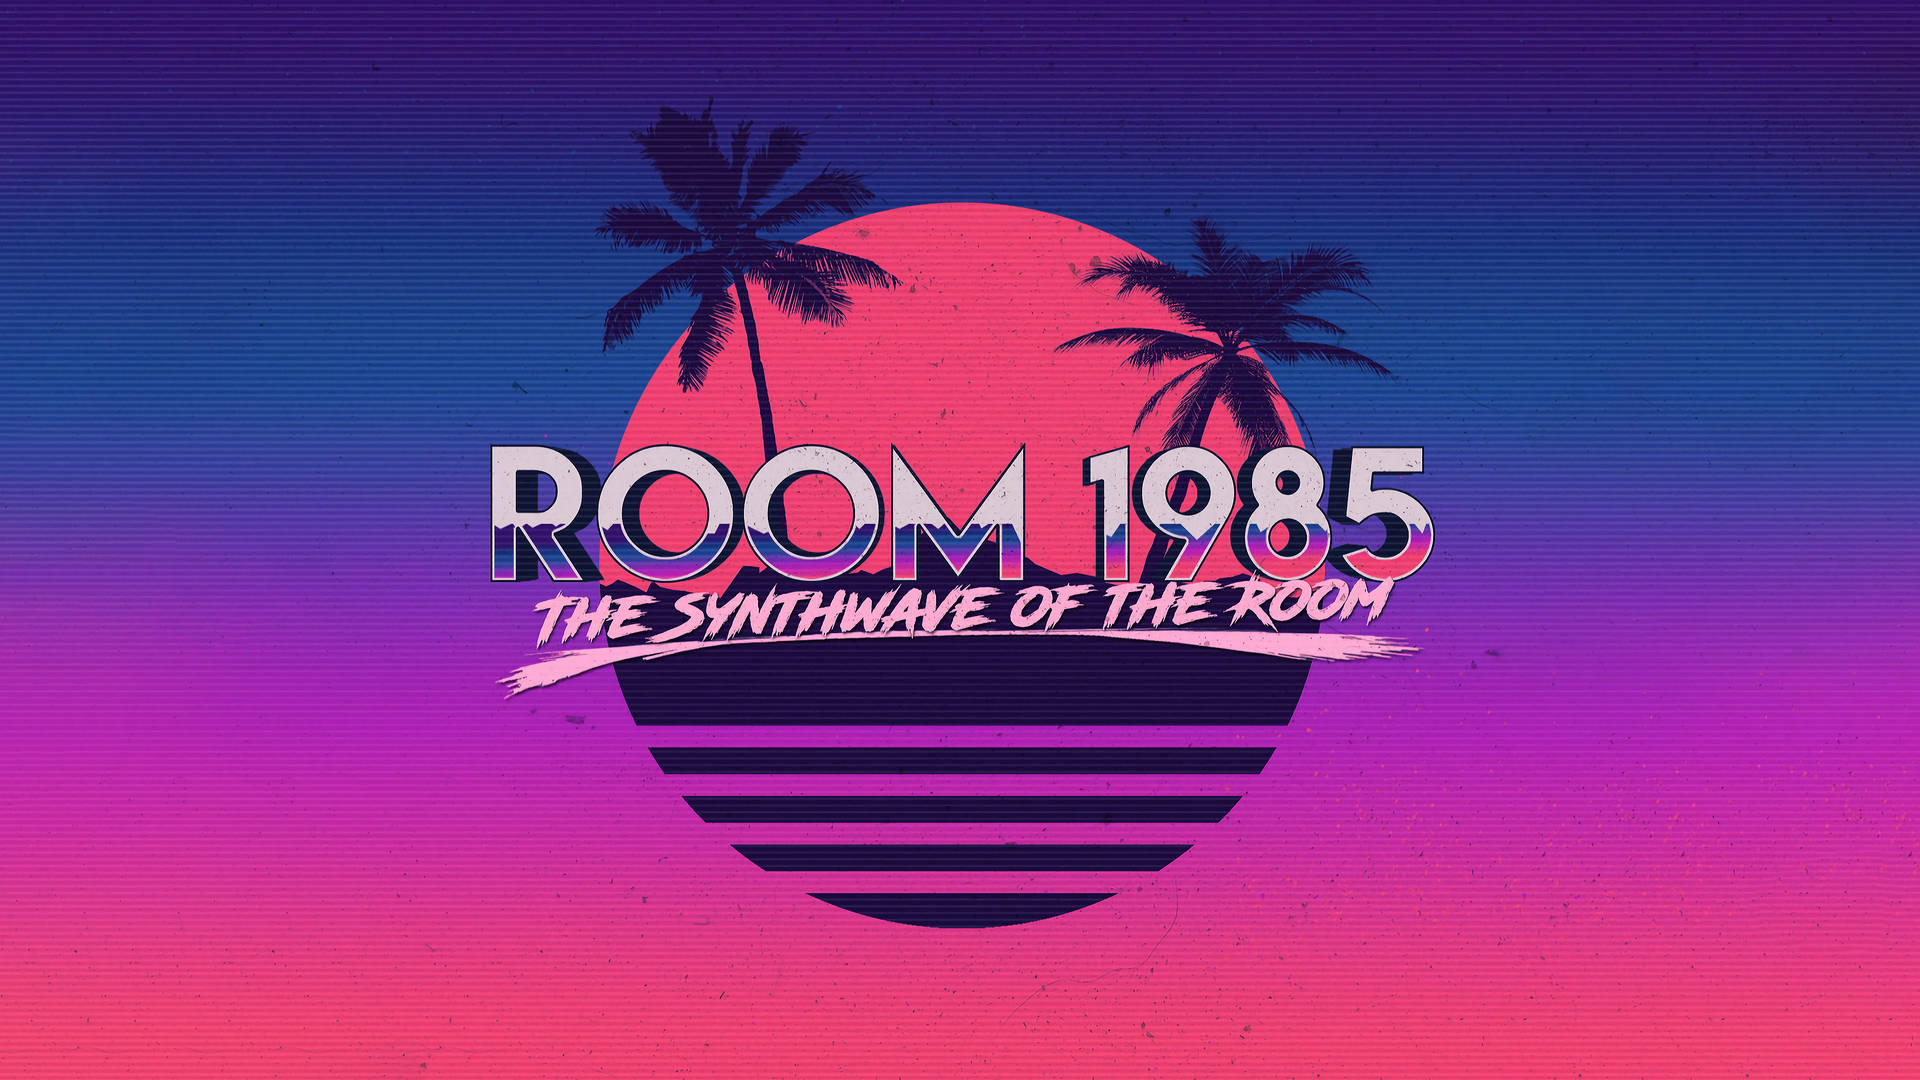 Synthwave The Room 1985